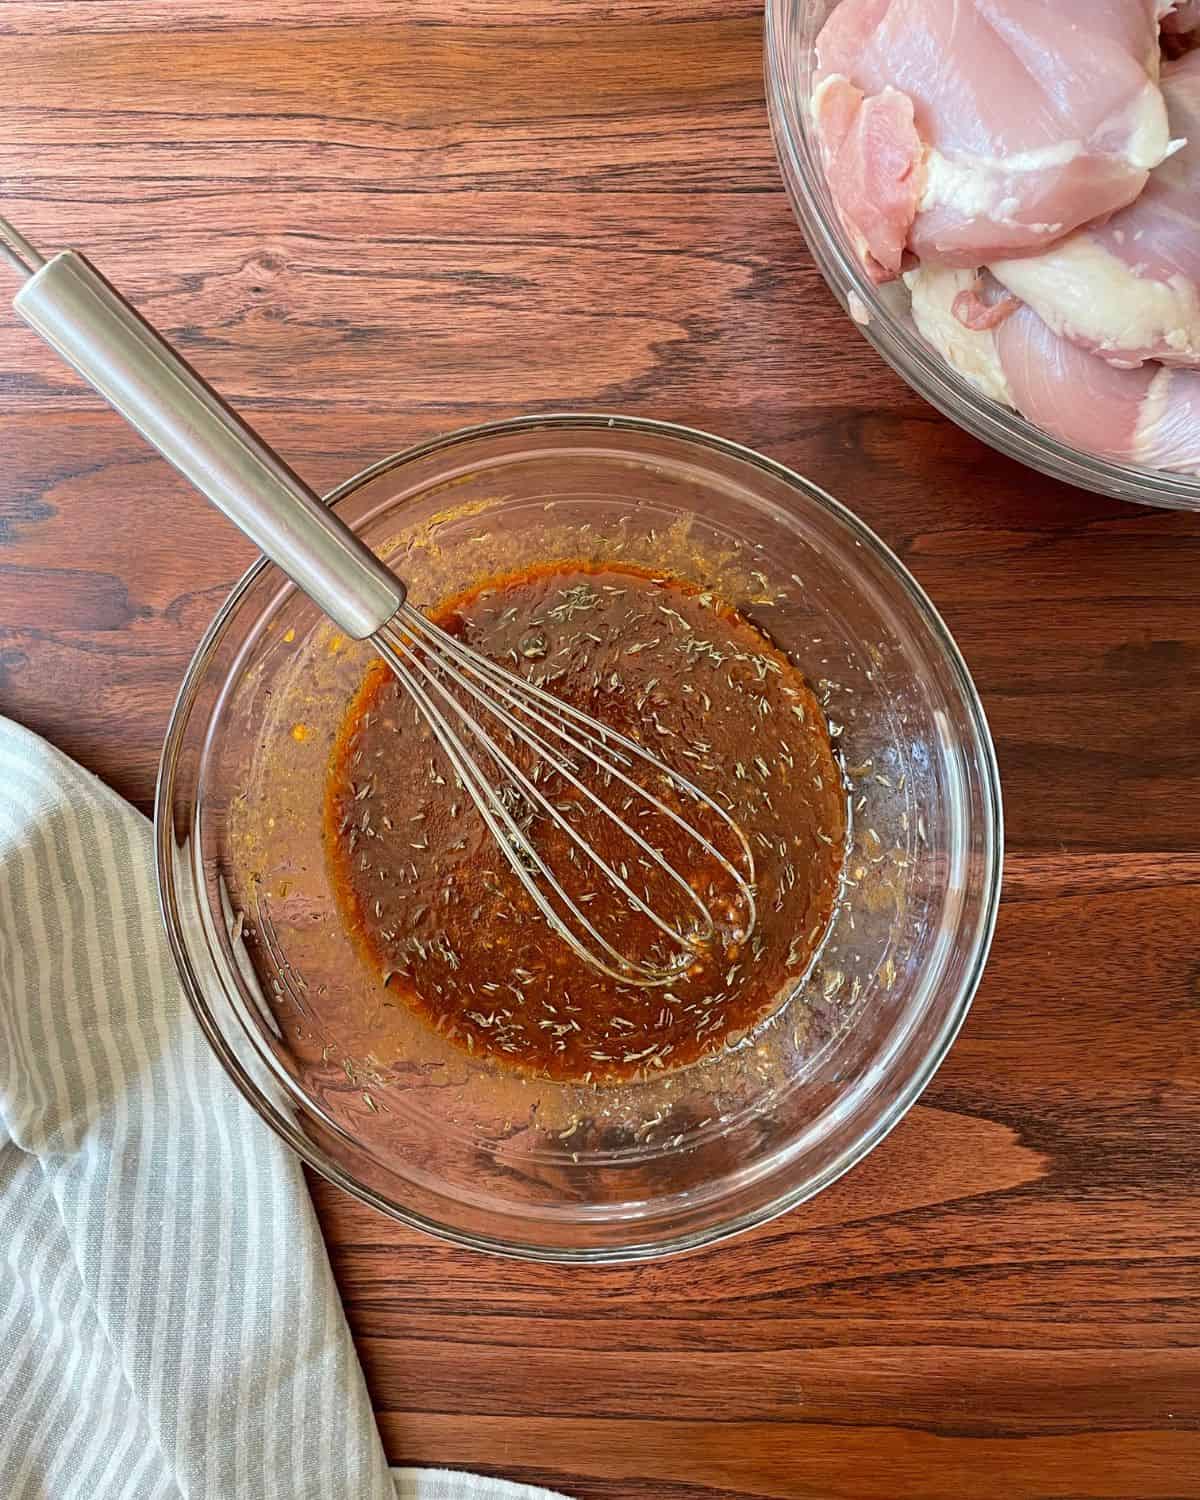 Balsamic marinade whisked together in a glass bowl, with a kitchen towel in the bottom left corner, and a bowl of raw chicken thighs in the top right corner.